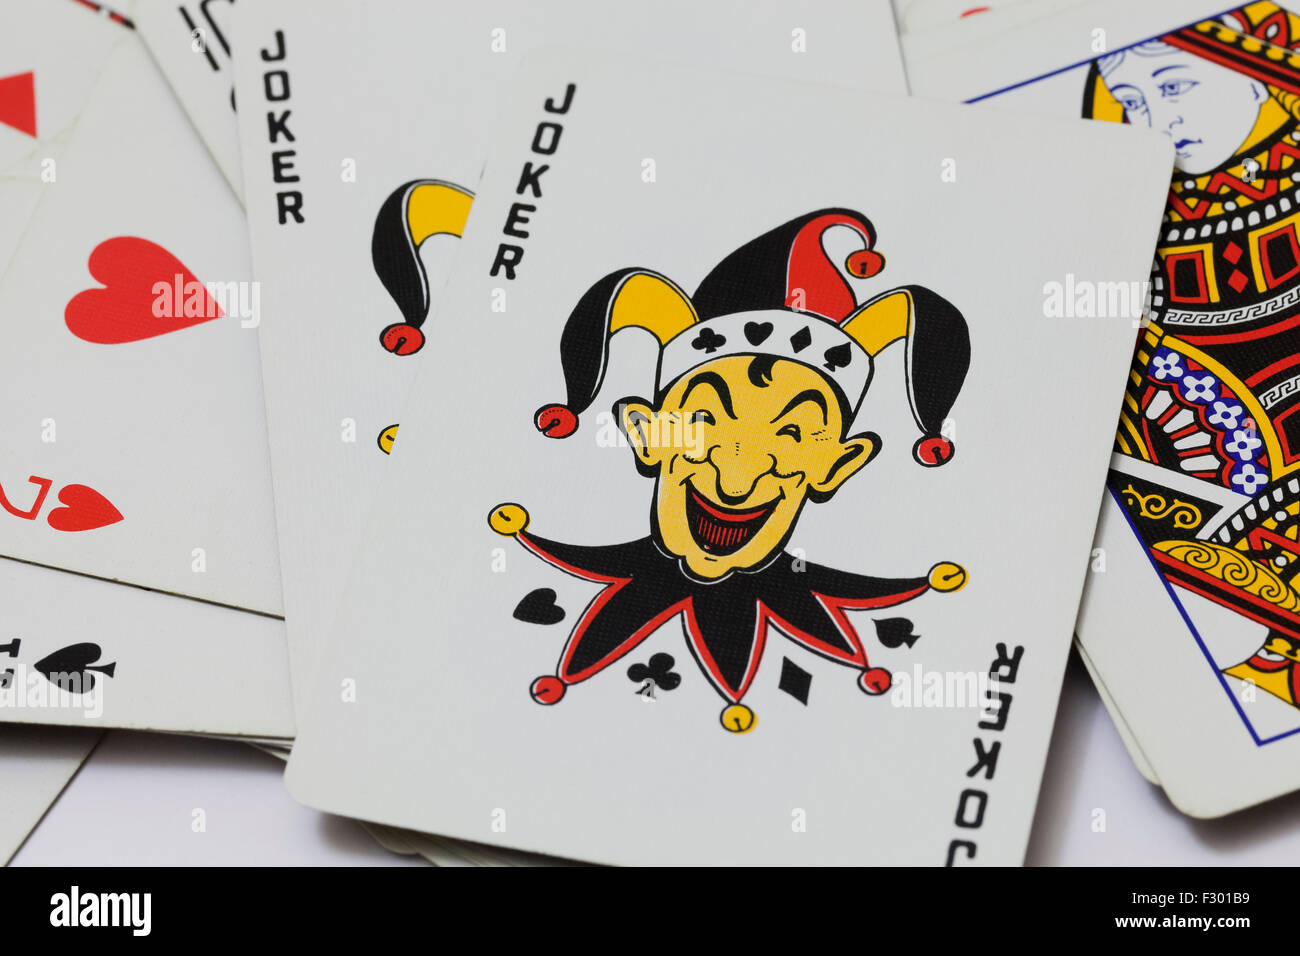 Joker on top of playing cards Stock Photo - Alamy